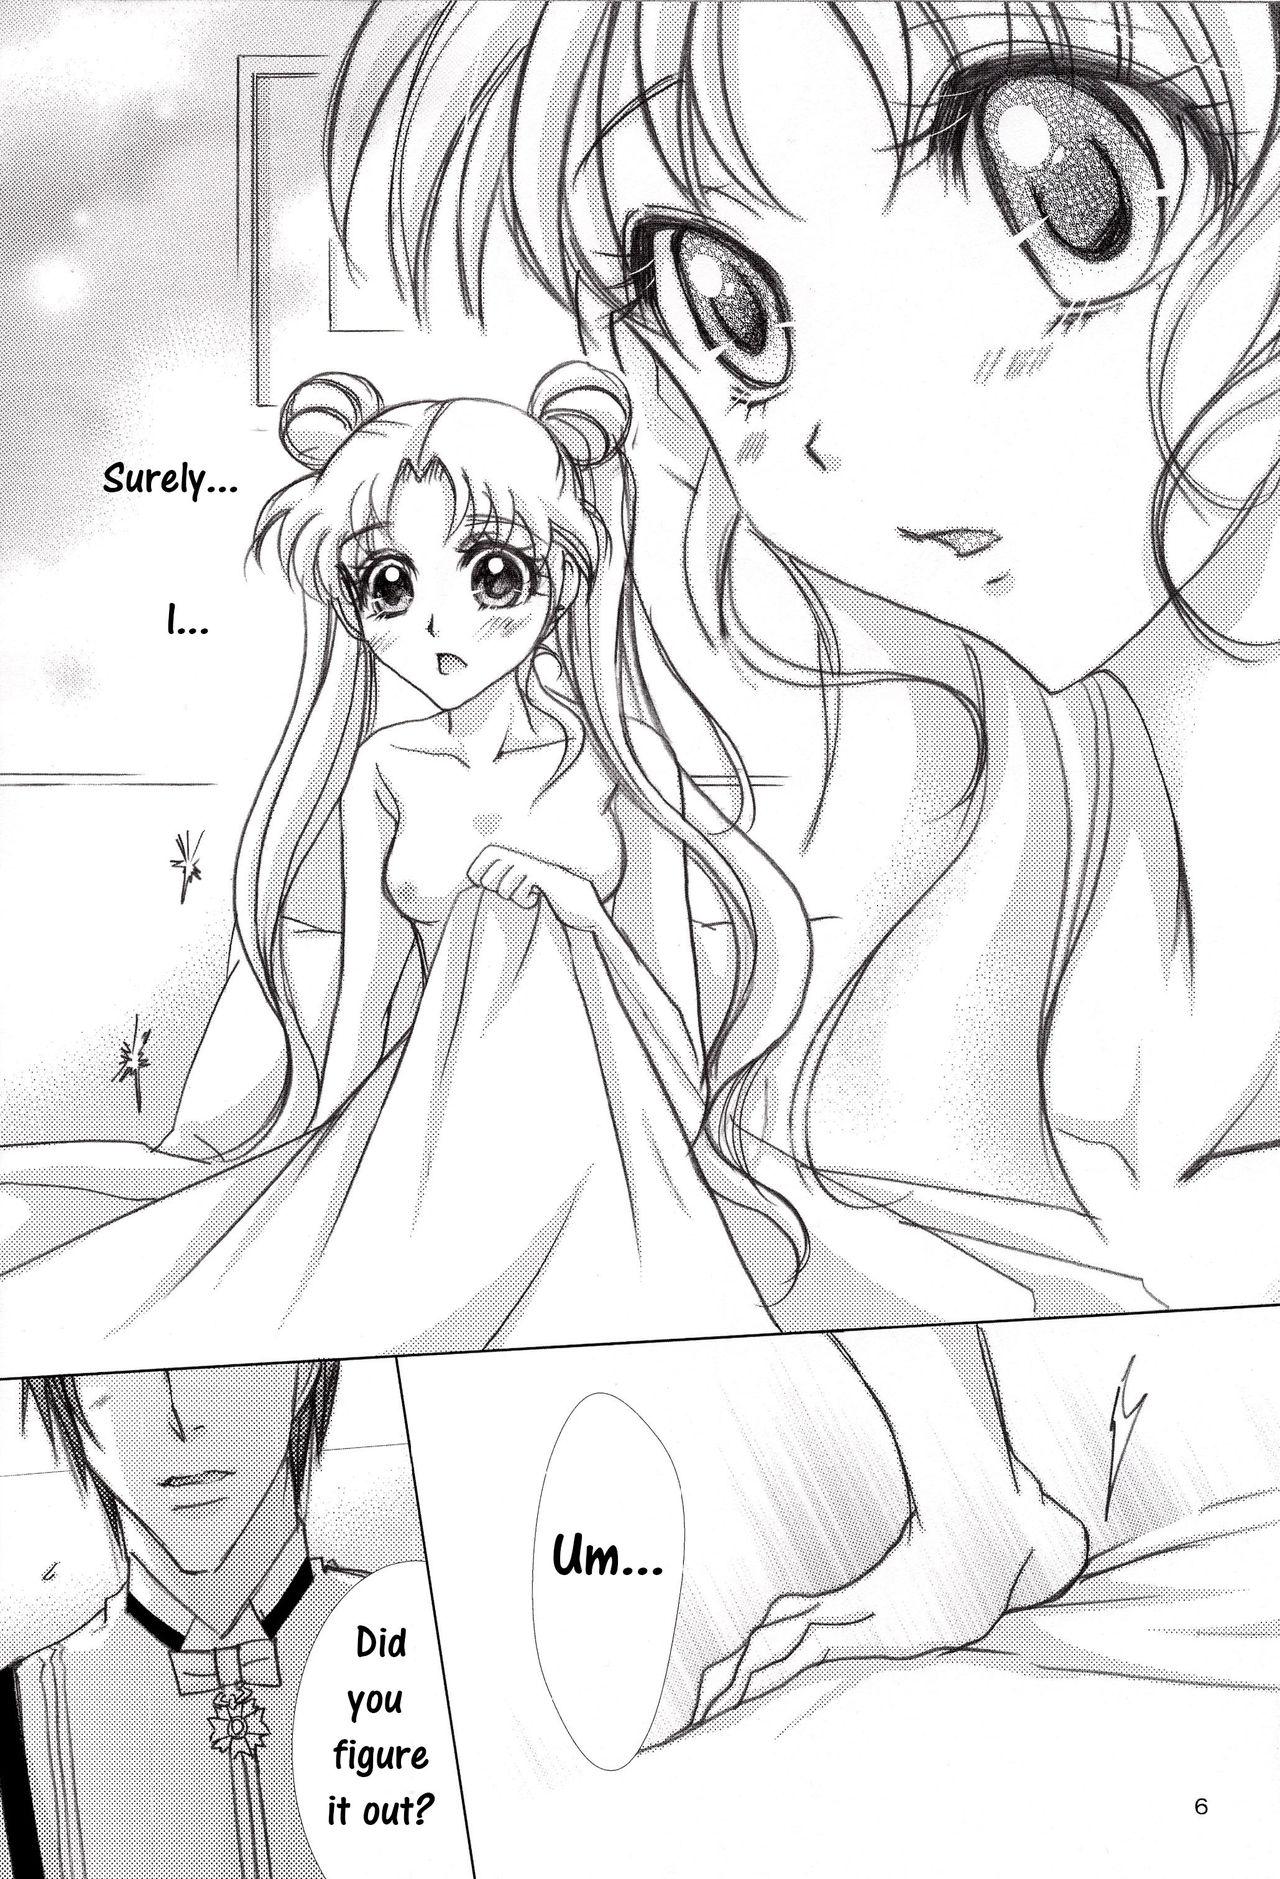 Casting MOON LIGHT LOVE - Sailor moon Spooning - Page 6